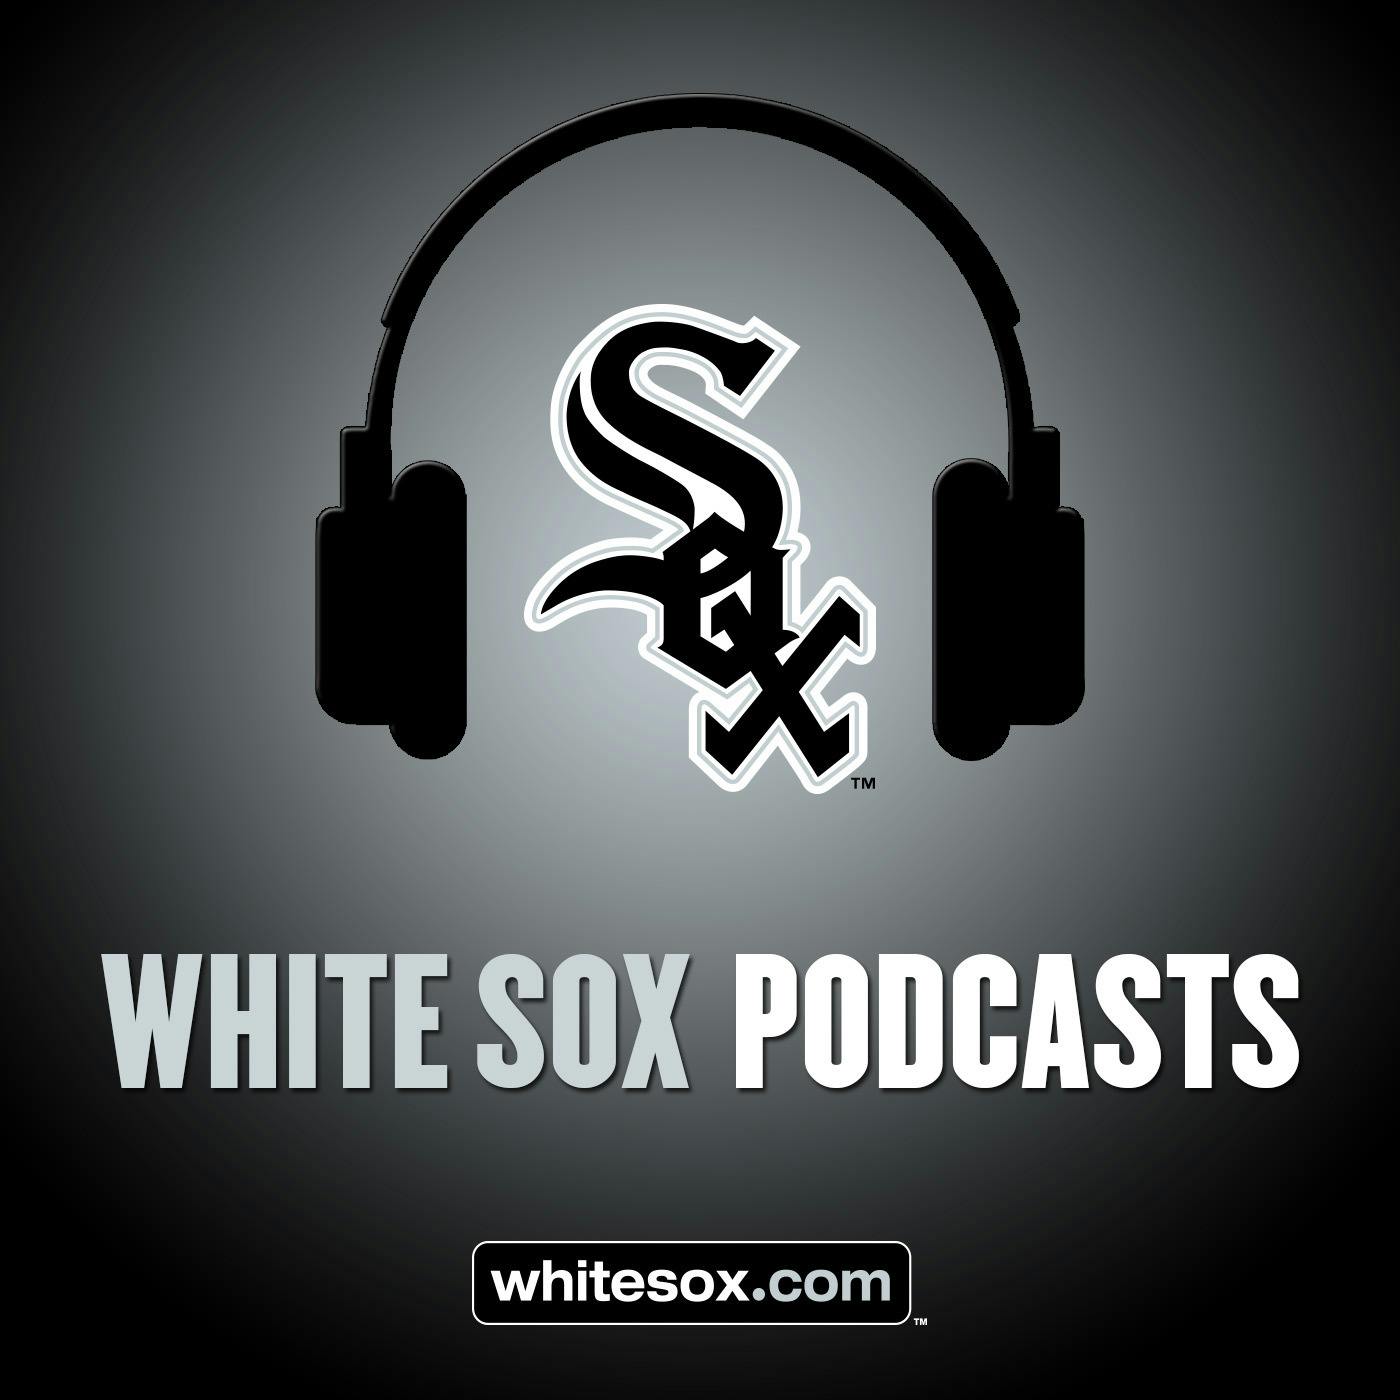 1/28/18: White Sox Weekly